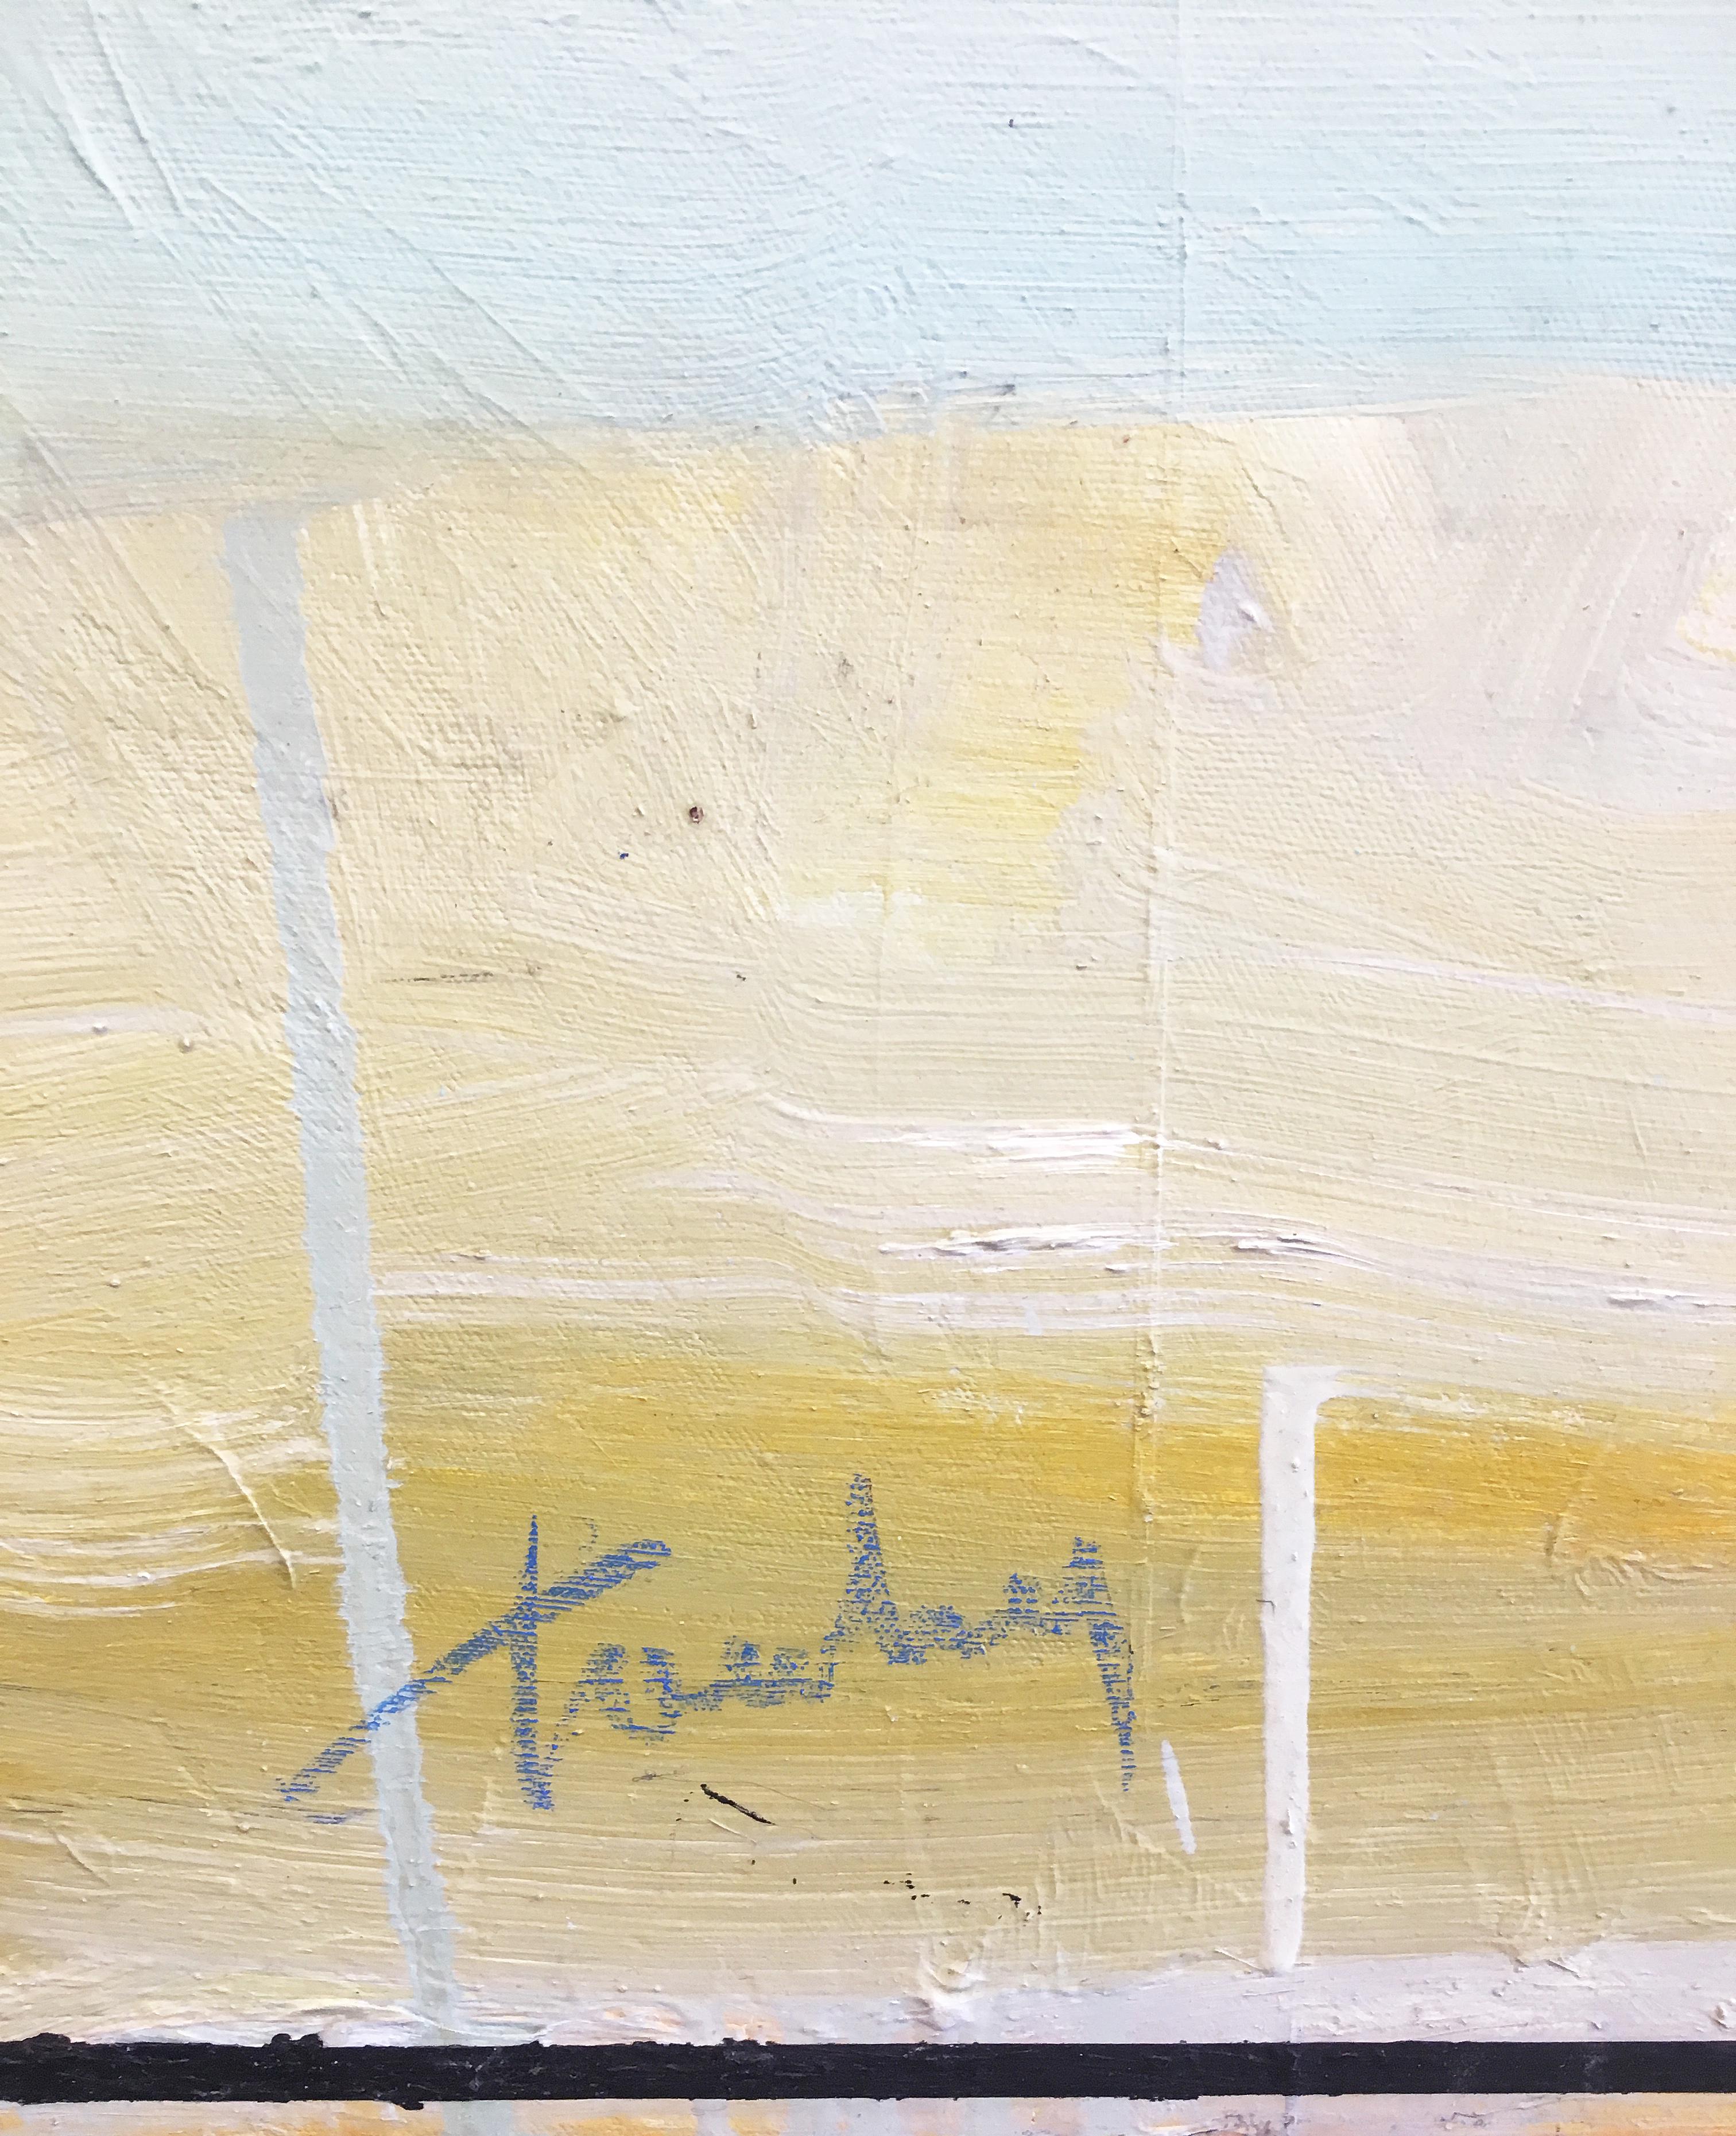 'Je T'aime 10' by Linda Touby, 2018. Oil on canvas, 40 x 42 inches. This painting features textural, cumulative layers of brushstrokes on a flat field of color. The floating zones of luminous pigments are in colors of blue, beige, green, and white 